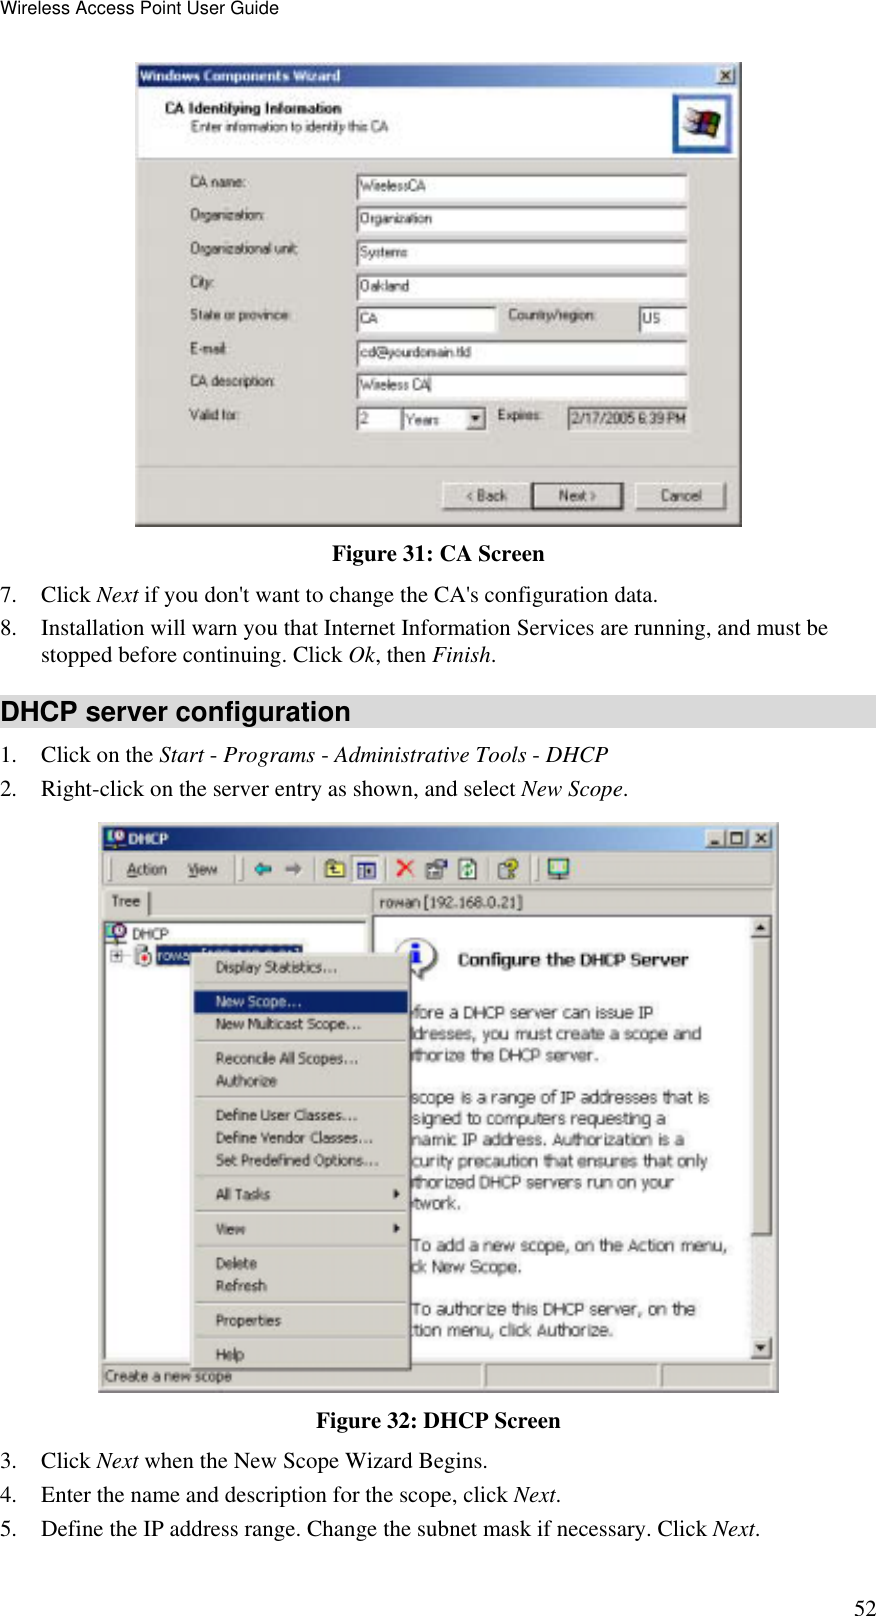 Wireless Access Point User Guide 52  Figure 31: CA Screen 7. Click Next if you don&apos;t want to change the CA&apos;s configuration data.  8.  Installation will warn you that Internet Information Services are running, and must be stopped before continuing. Click Ok, then Finish.  DHCP server configuration 1.  Click on the Start - Programs - Administrative Tools - DHCP  2.  Right-click on the server entry as shown, and select New Scope.   Figure 32: DHCP Screen 3. Click Next when the New Scope Wizard Begins.  4.  Enter the name and description for the scope, click Next.  5.  Define the IP address range. Change the subnet mask if necessary. Click Next.  